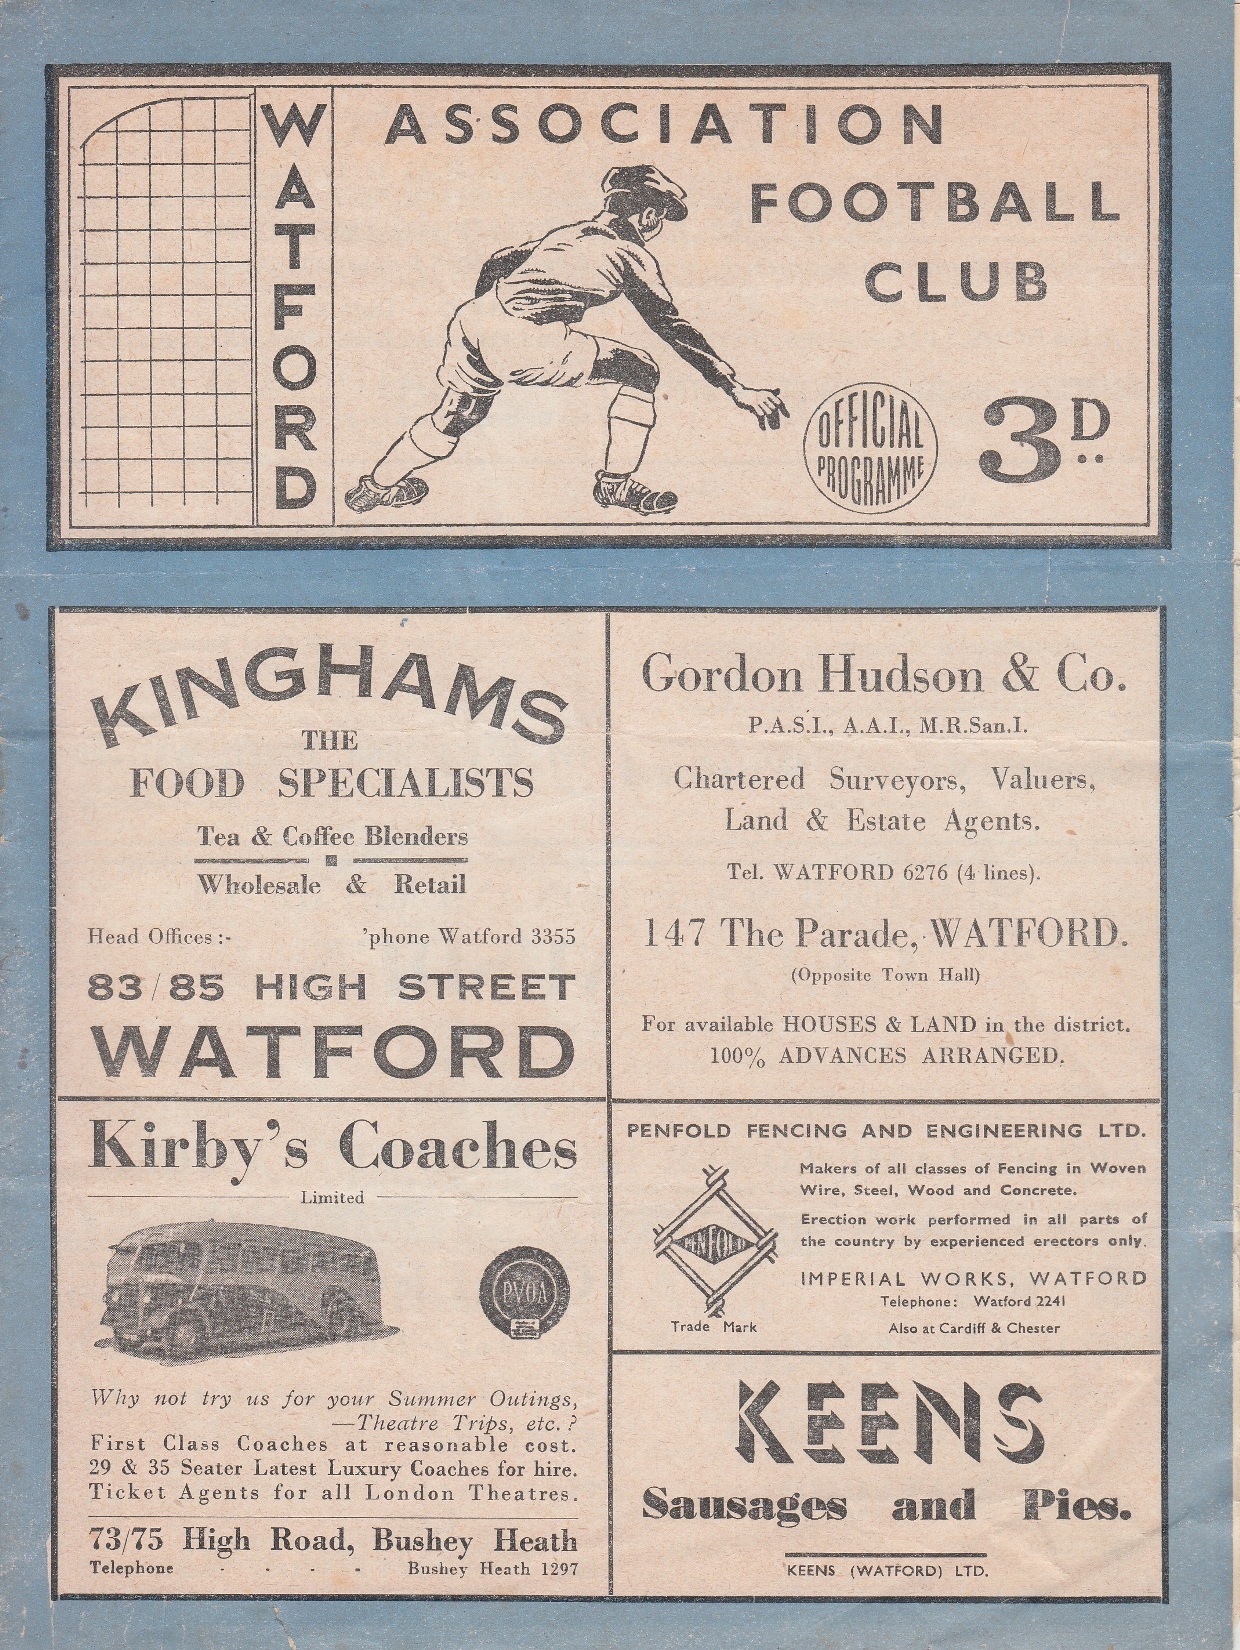 Do you know why the Preston programme was printed without a date? Credit: Phil Hayes